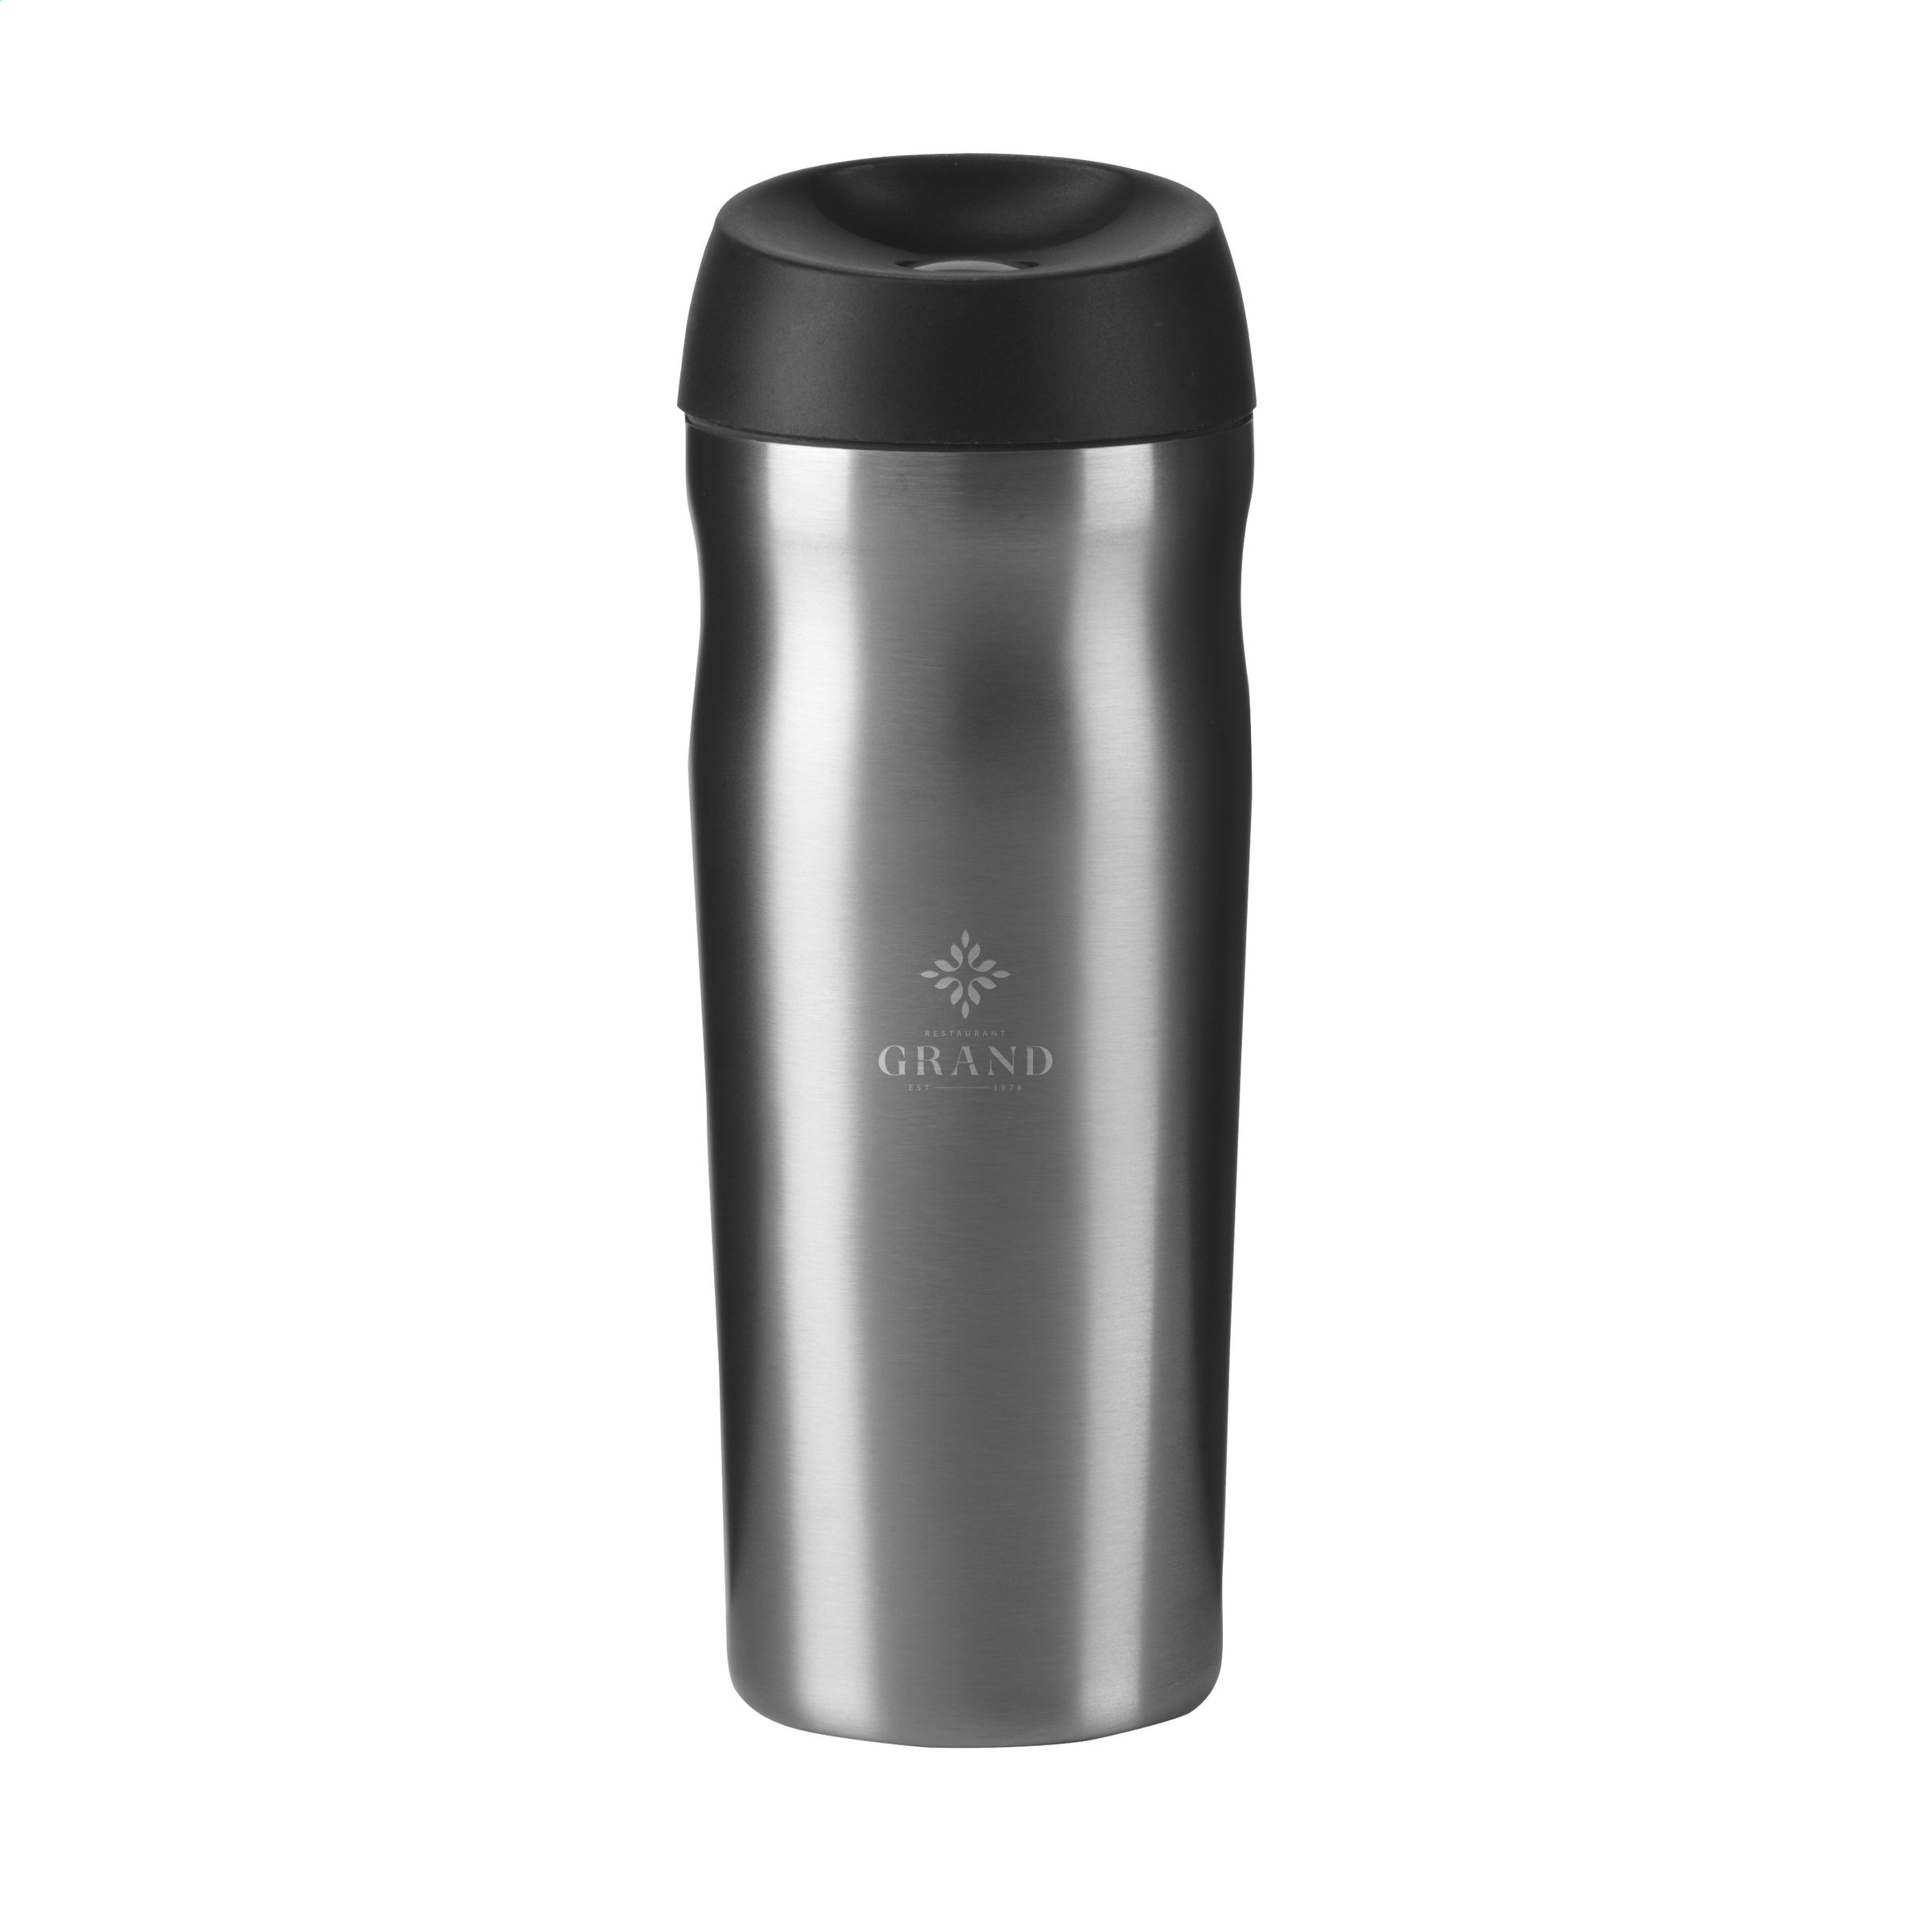 This is a thermo cup made out of recycled stainless steel and is insulated. It is designed to keep your drinks at the desired temperature for a longer period of time. - Churchdown